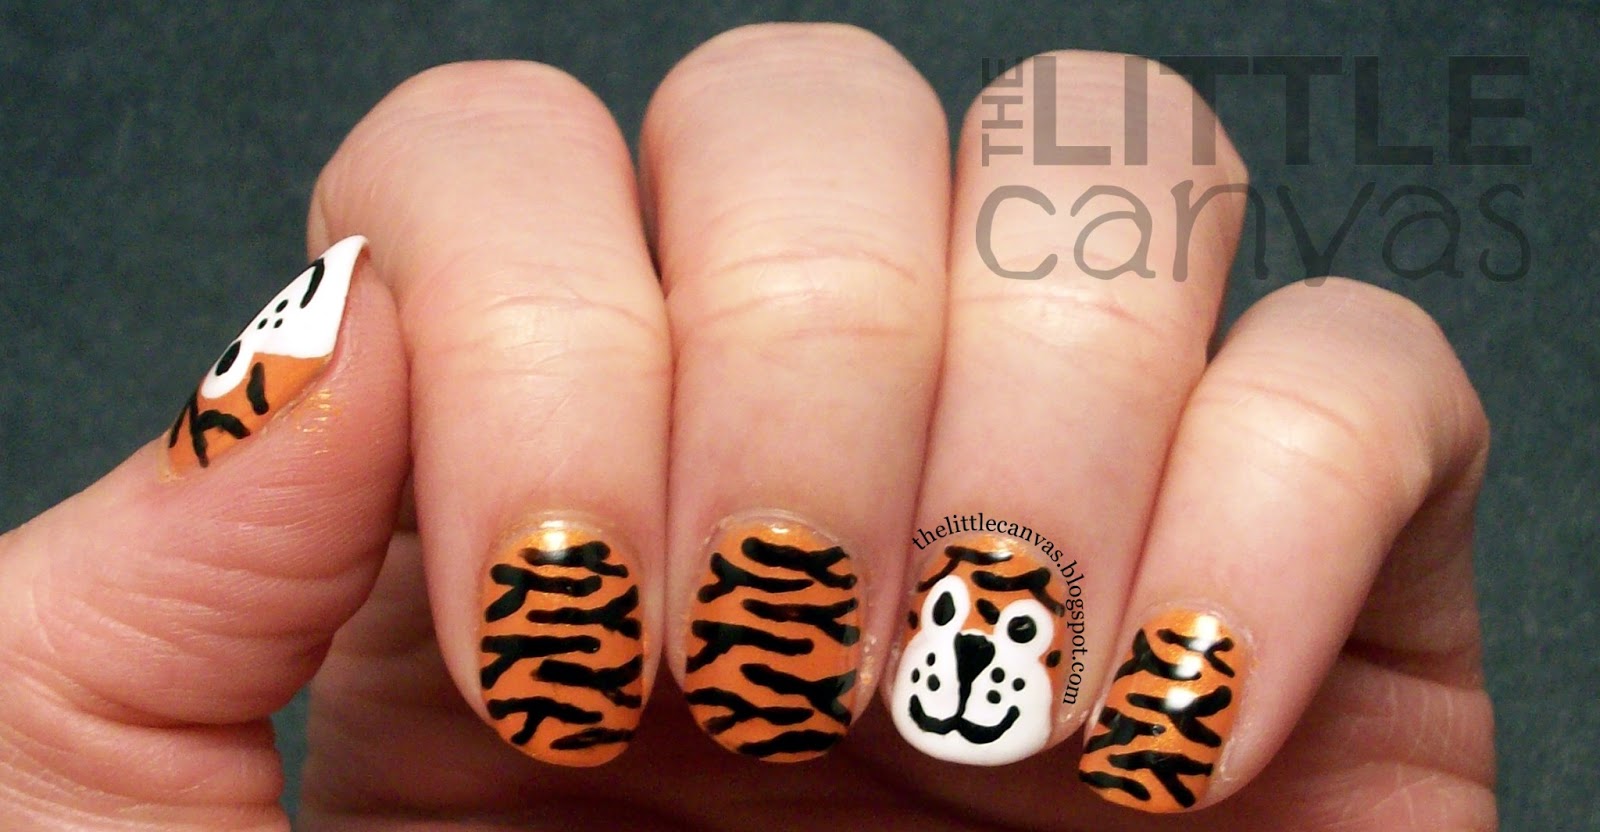 1. Tiger Lily Nail Art Designs - wide 5